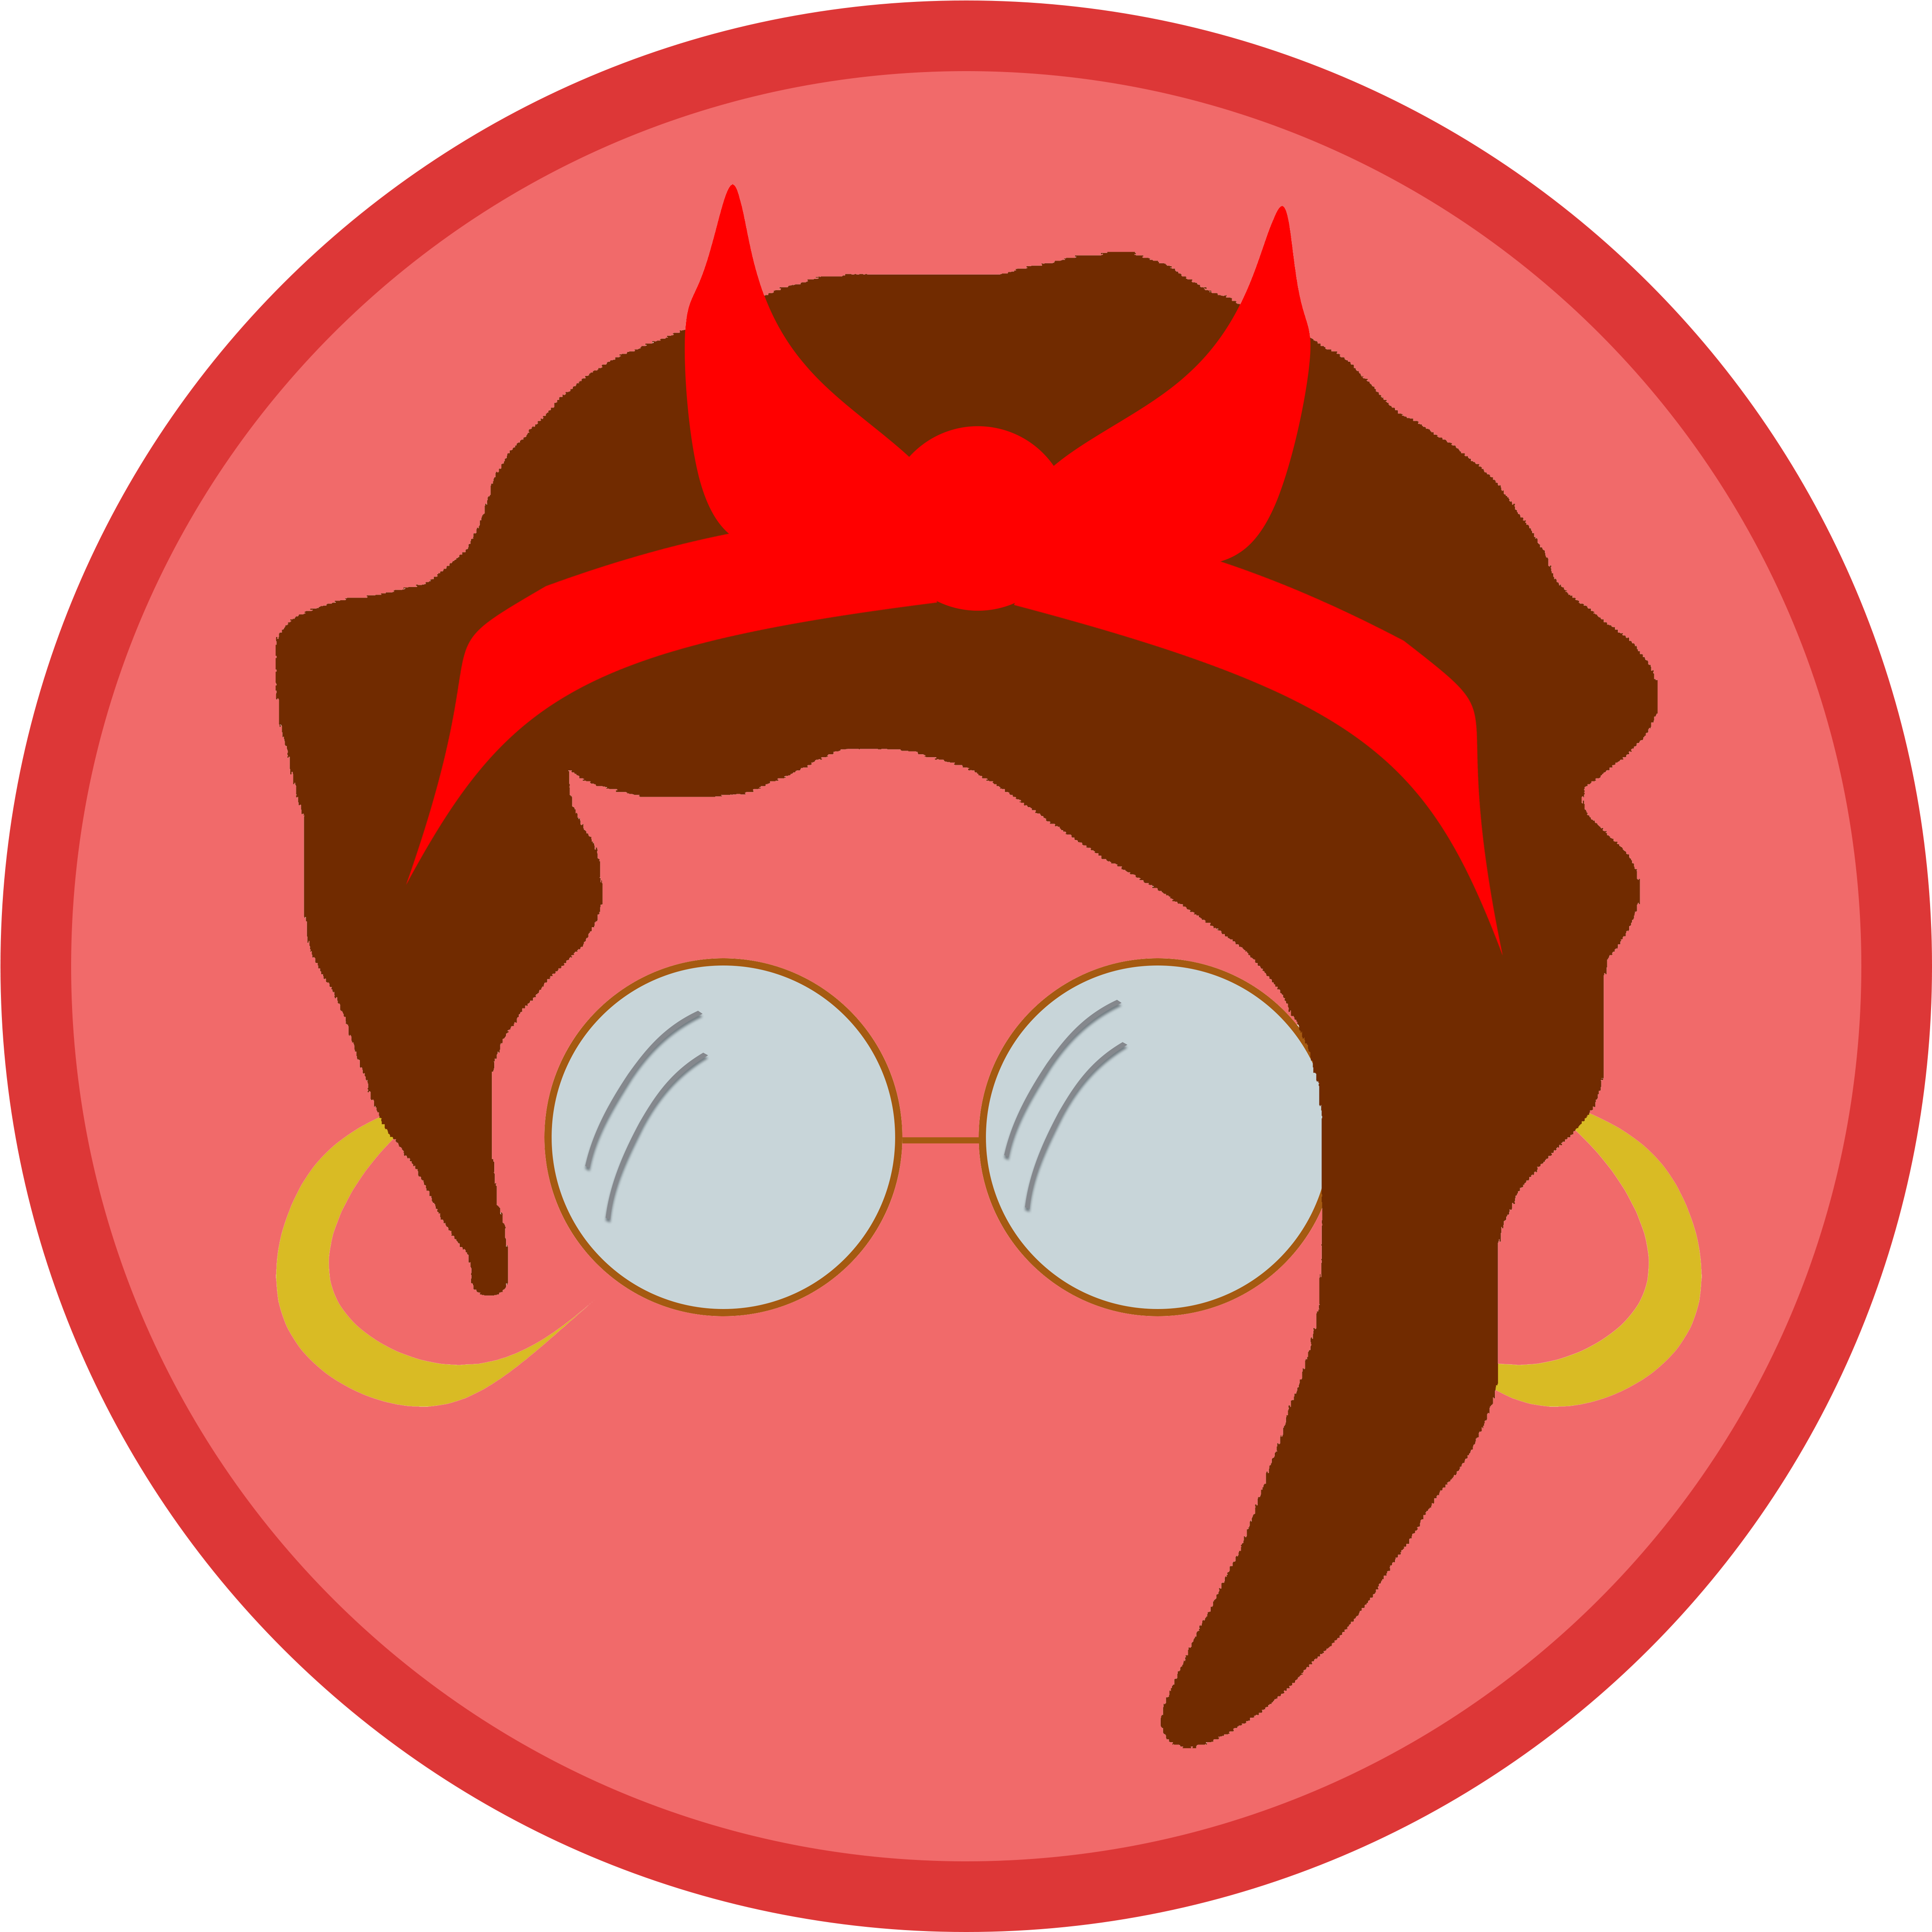 A Cartoon Of A Woman With Glasses And Horns